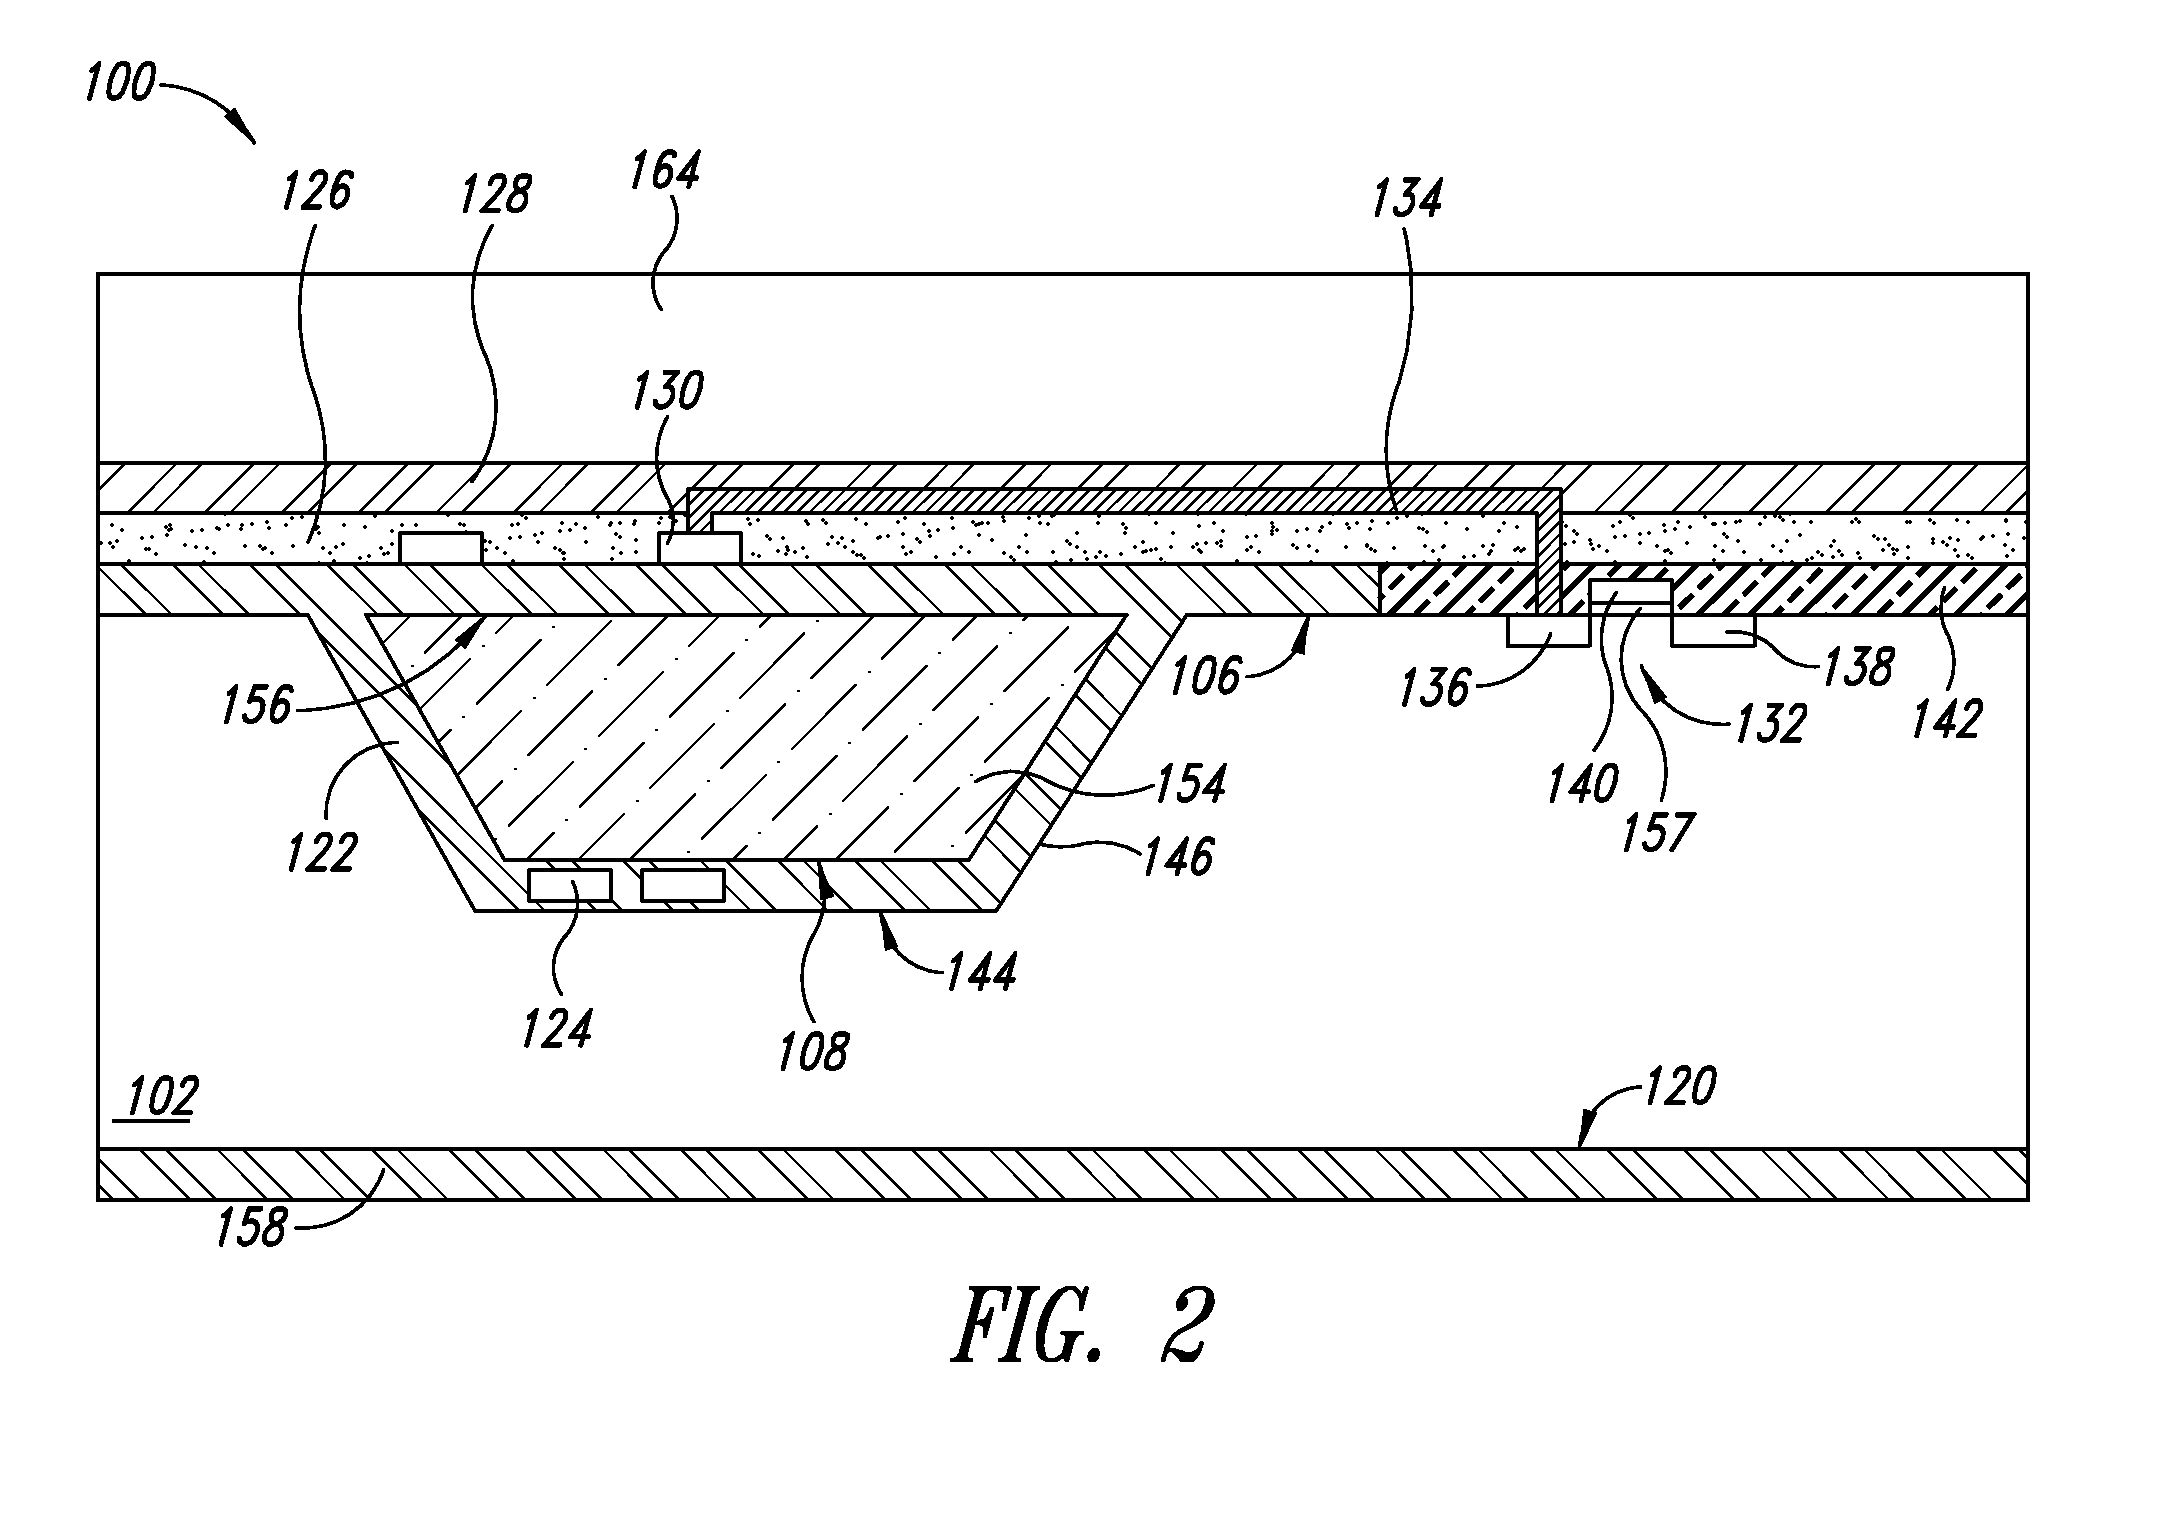 Microfluidic nozzle formation and process flow